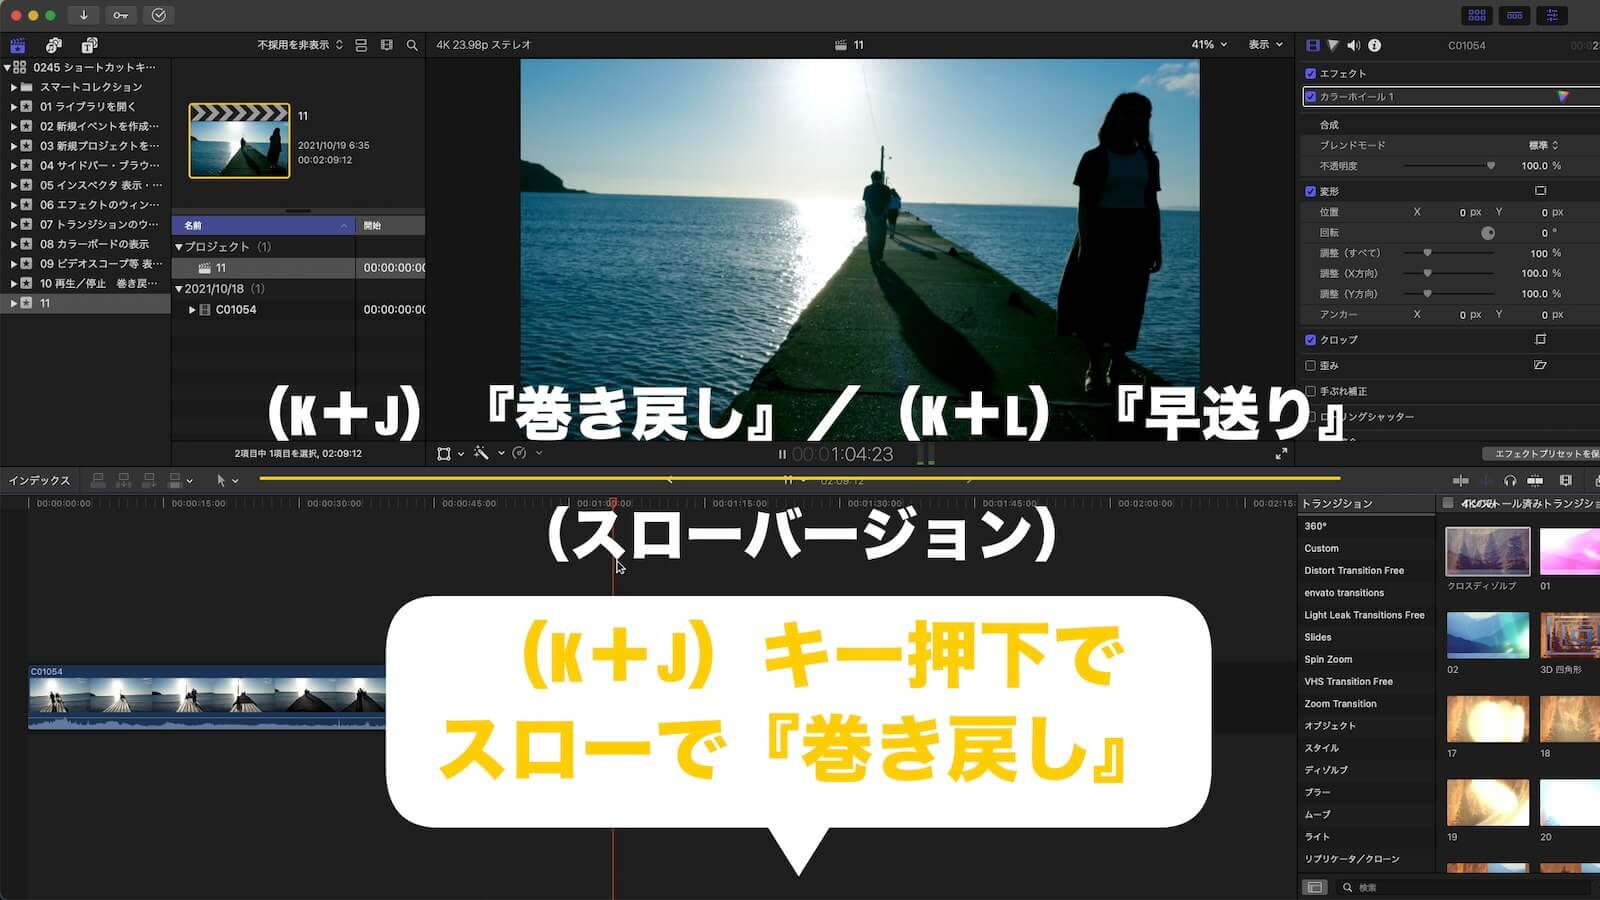 Final Cut Pro Shortcut key description image for rewinding and fast-forwarding at slow speed